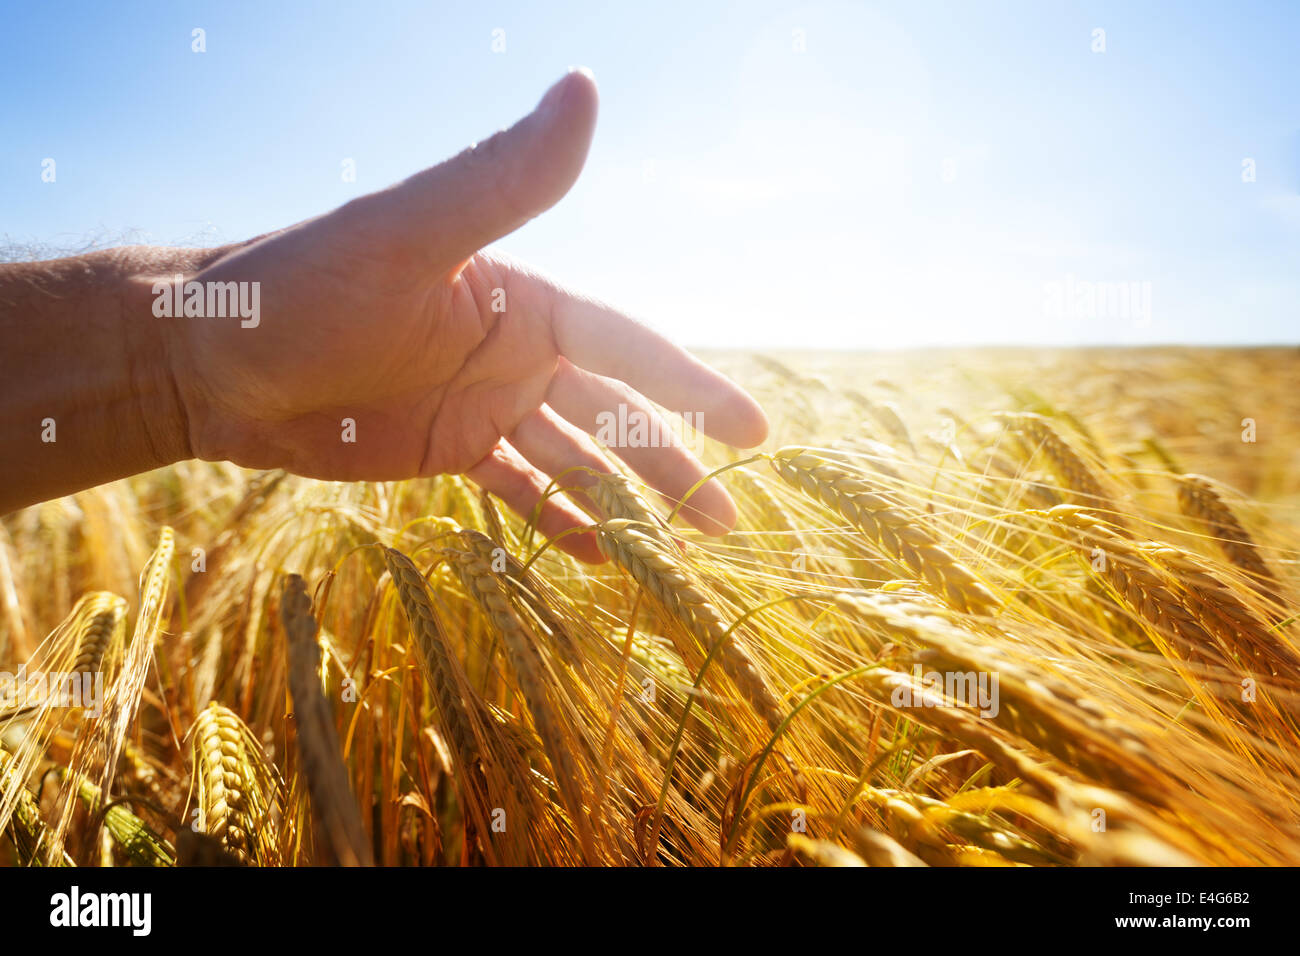 Hand touching wheat ears in a golden field Stock Photo